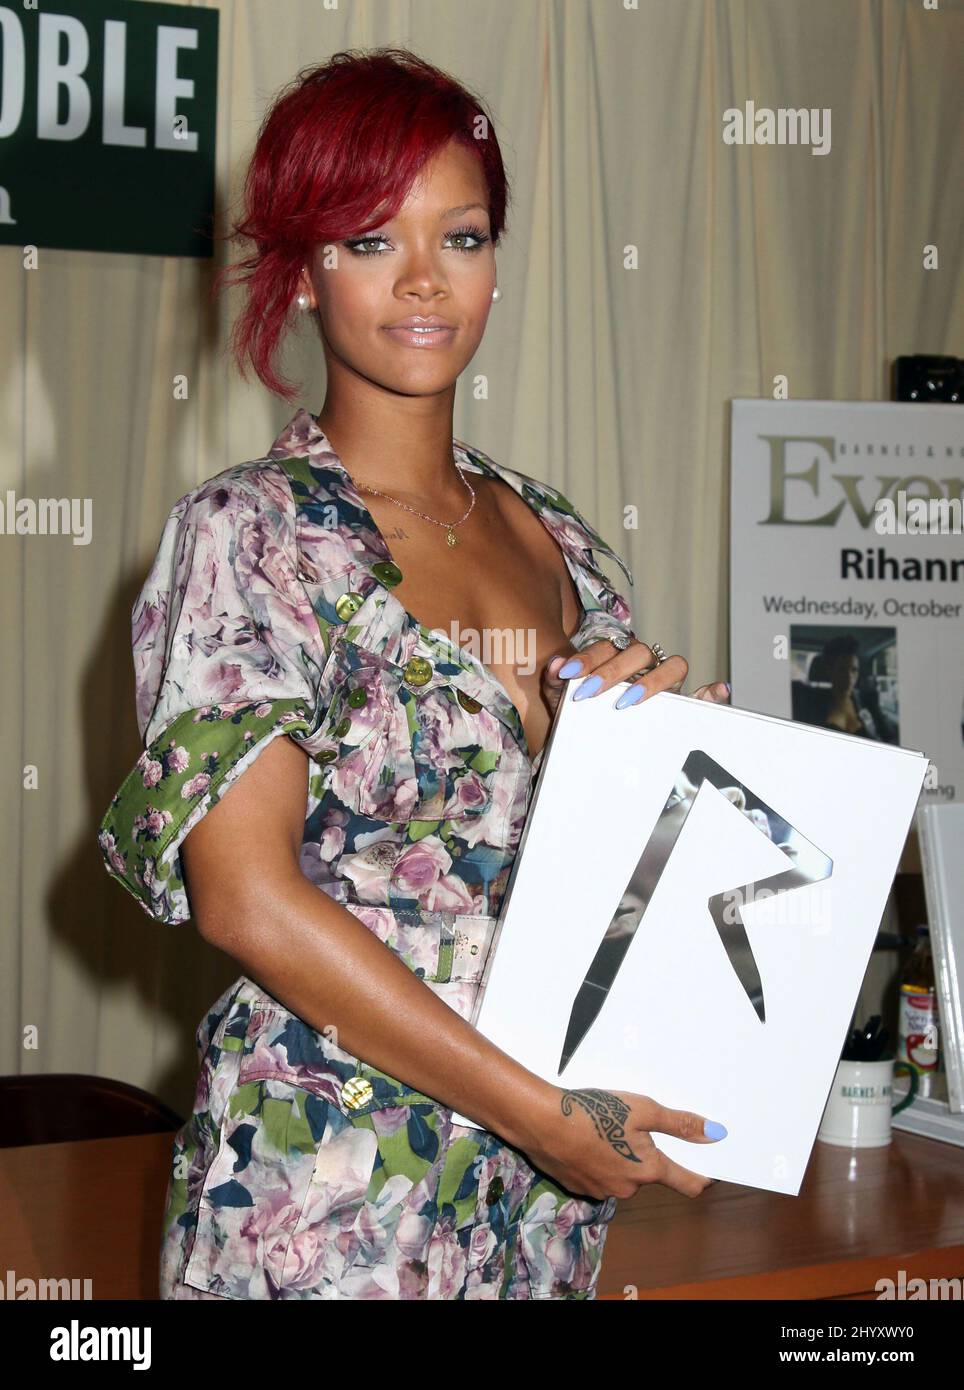 Rihanna Signs Copies Of Her New Book Rihanna The Last Girl On Earth At Barnes And Noble Store